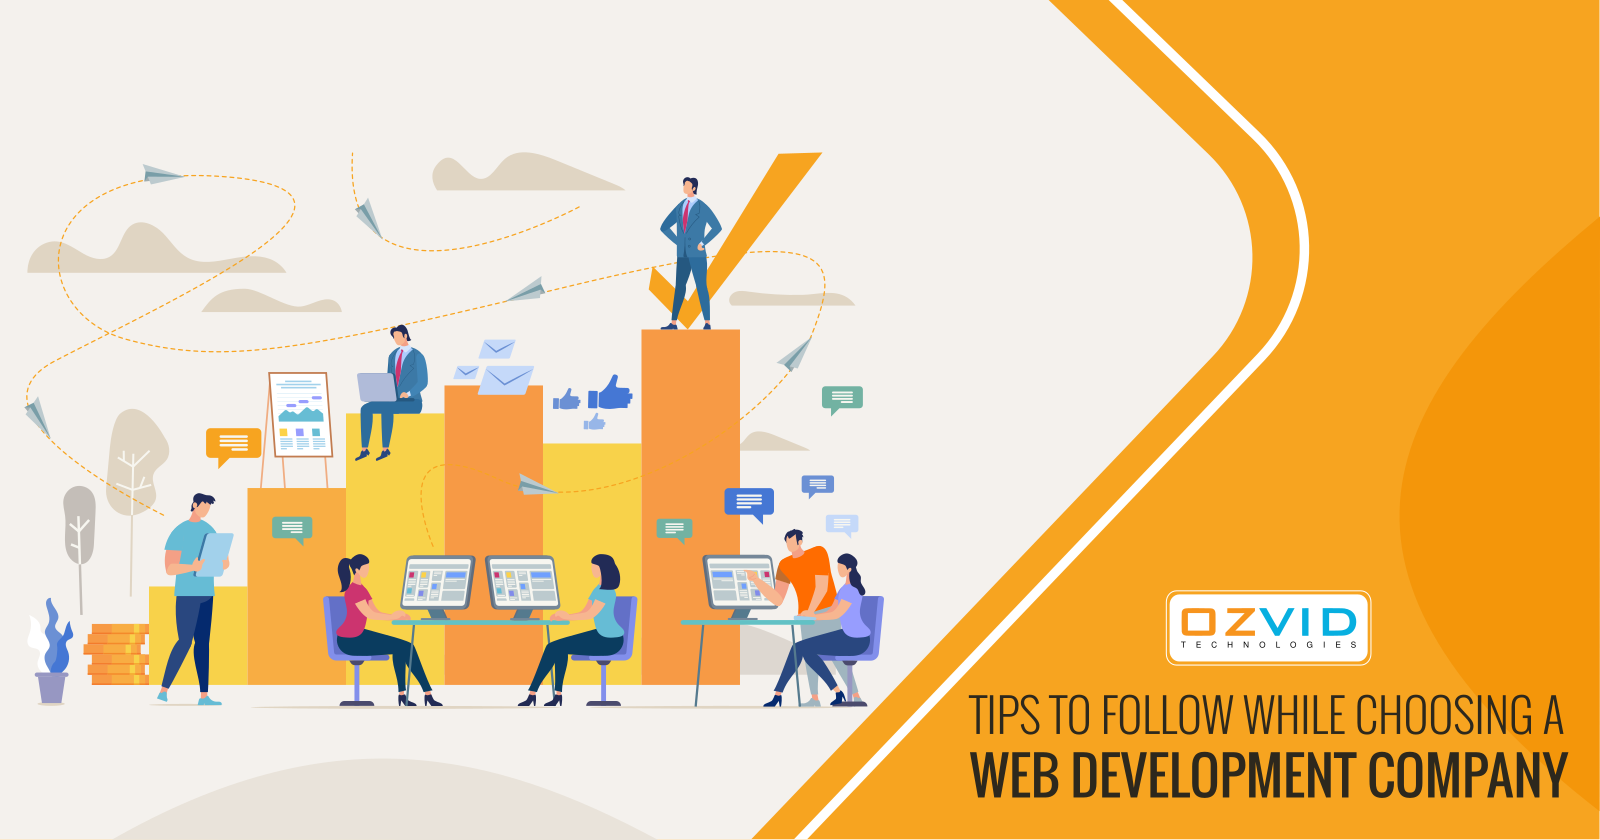 5 Simple Tips to Follow While Choosing a Web Development Company